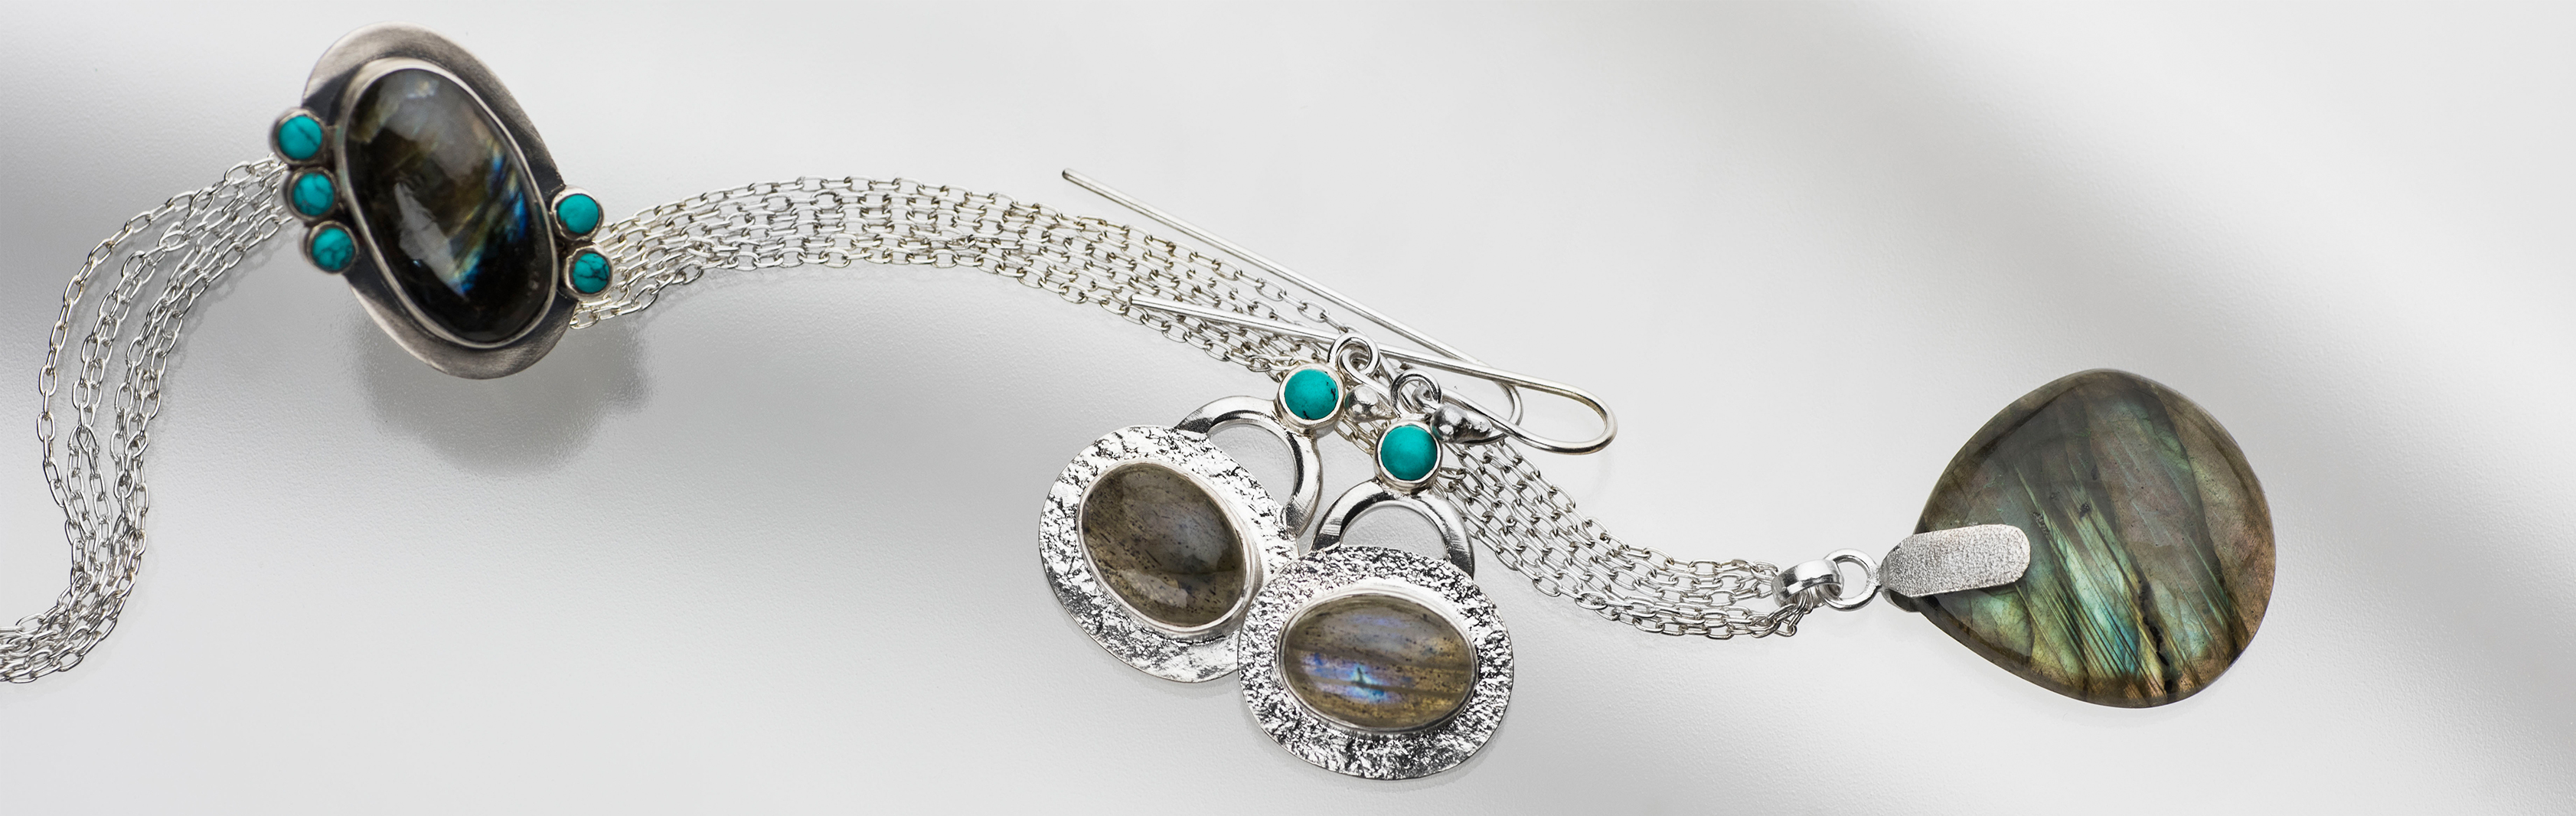 Silver jewelry, impressive silver jewelry, silver and gems, large silver necklace, silver necklace with presence, gemstone, turquoise, long stud earring, Drop Earrings, hammered silver, special silver jewelry, GRAS silver jewelry, turquoise stone jewelry,